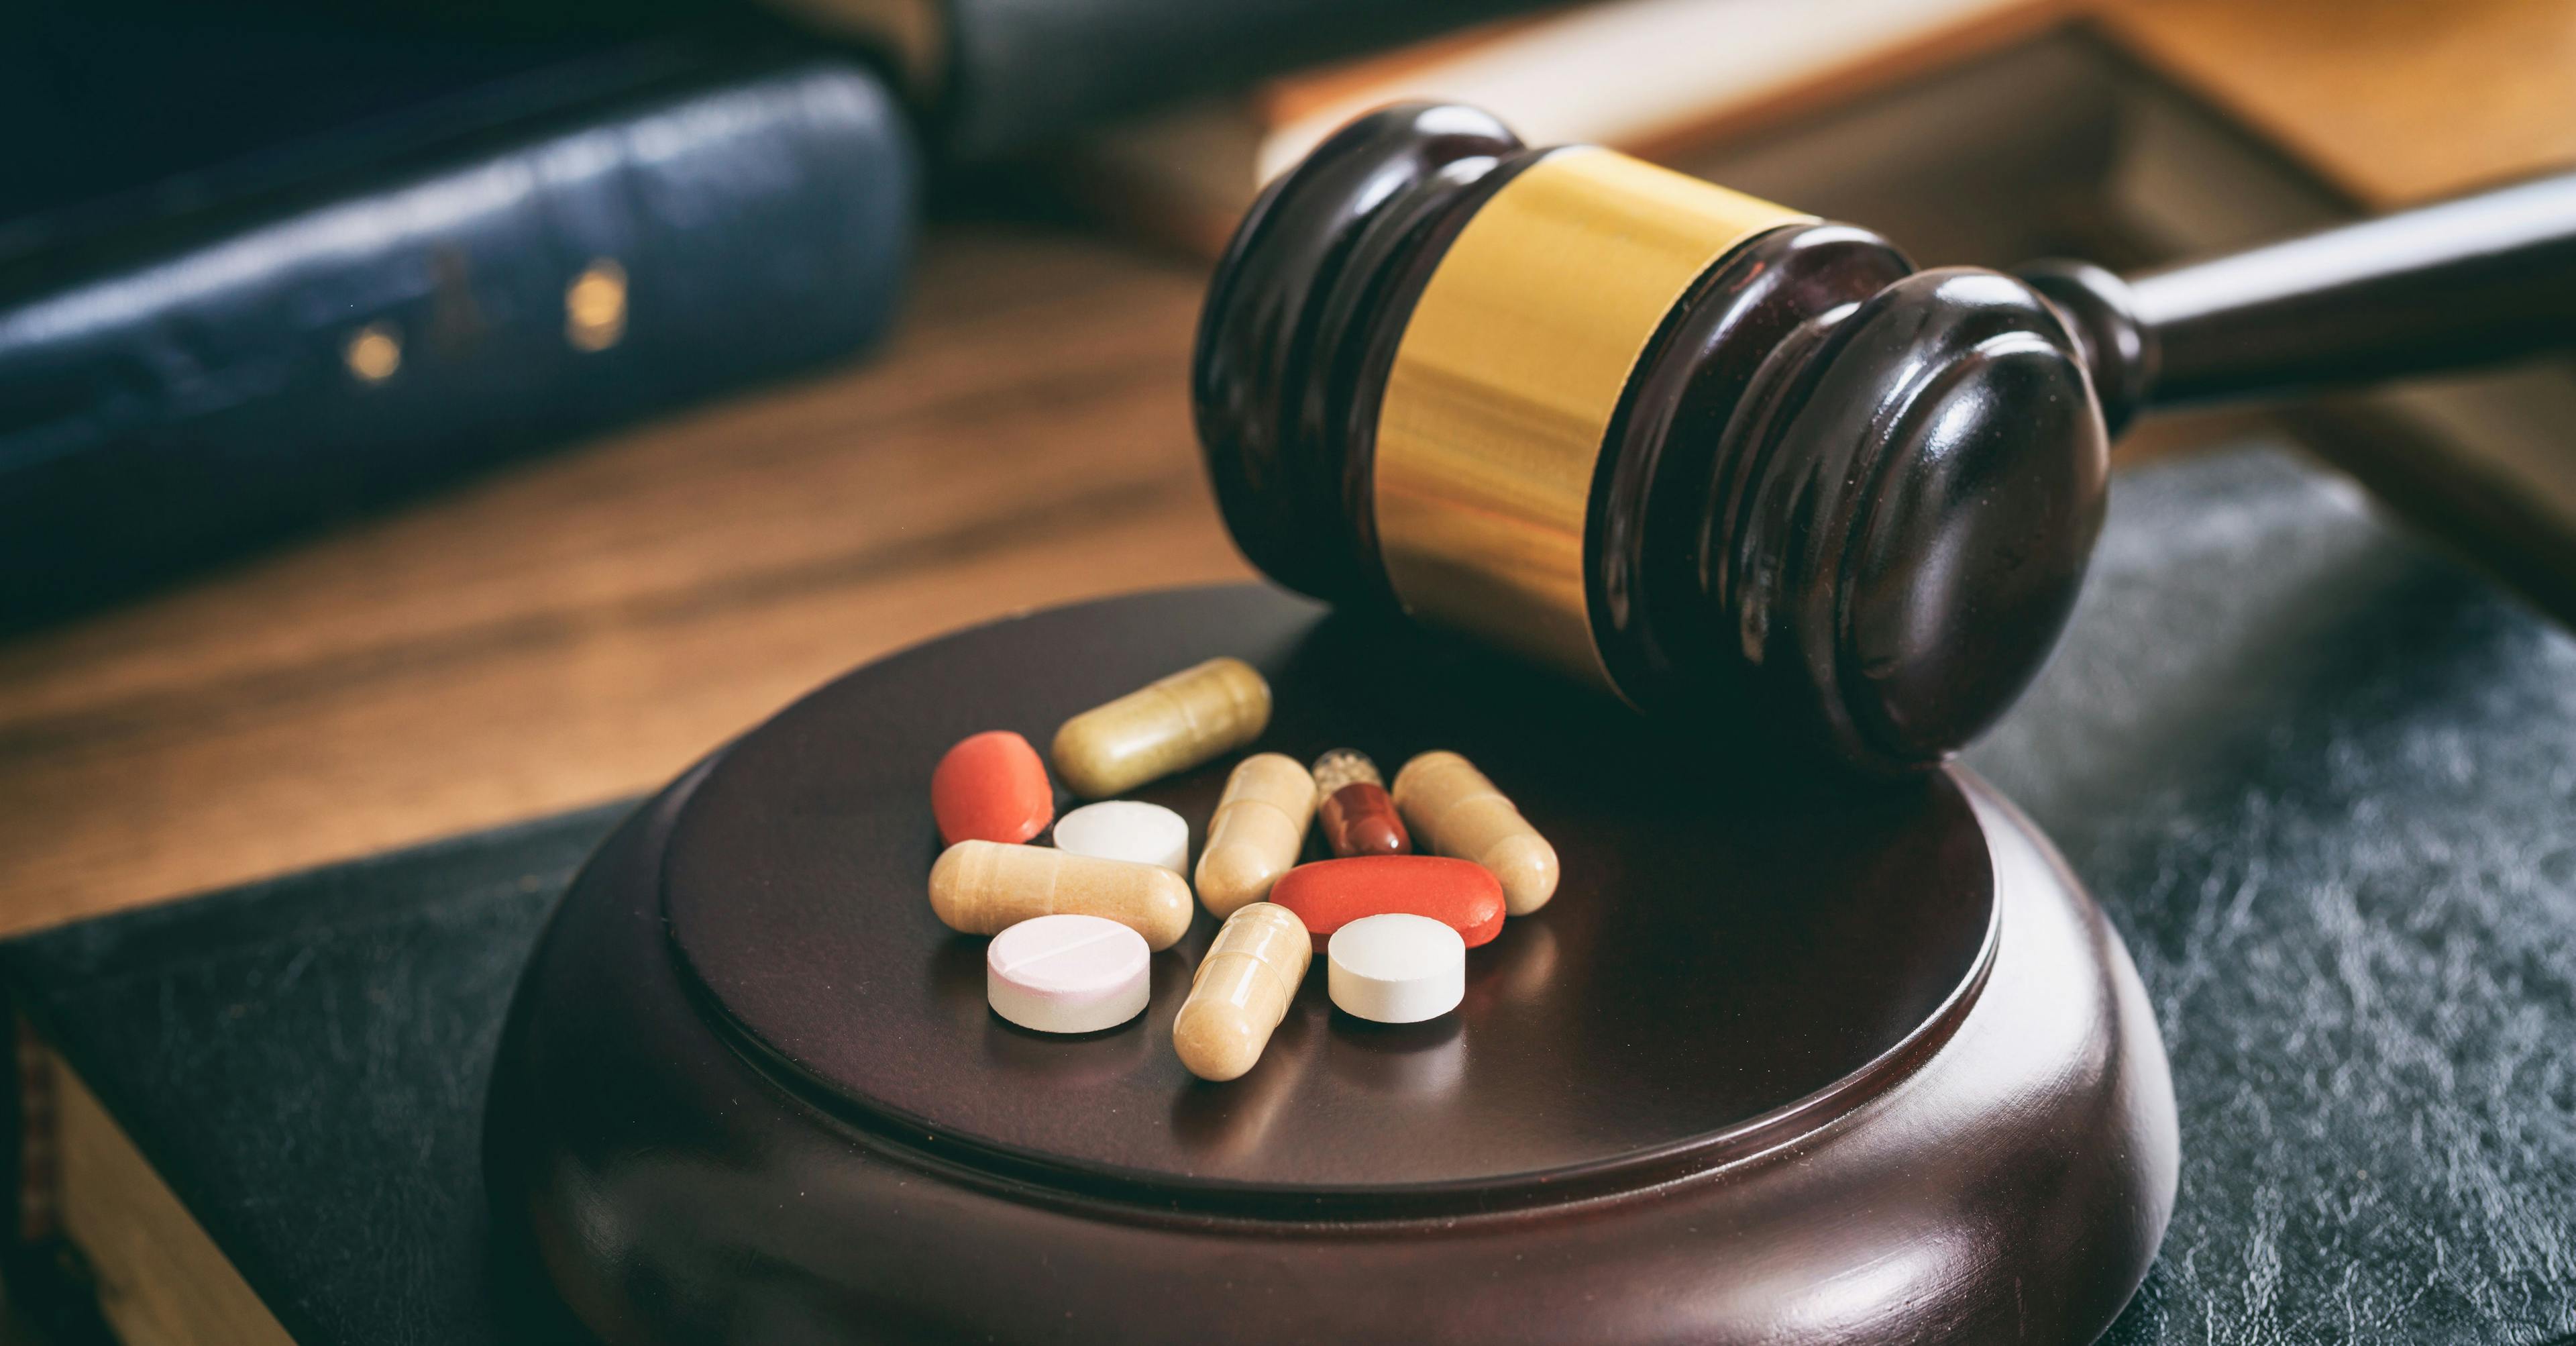 Judge gavel and drugs on a wooden desk. Image Credit: Adobe Stock Images/Rawf8